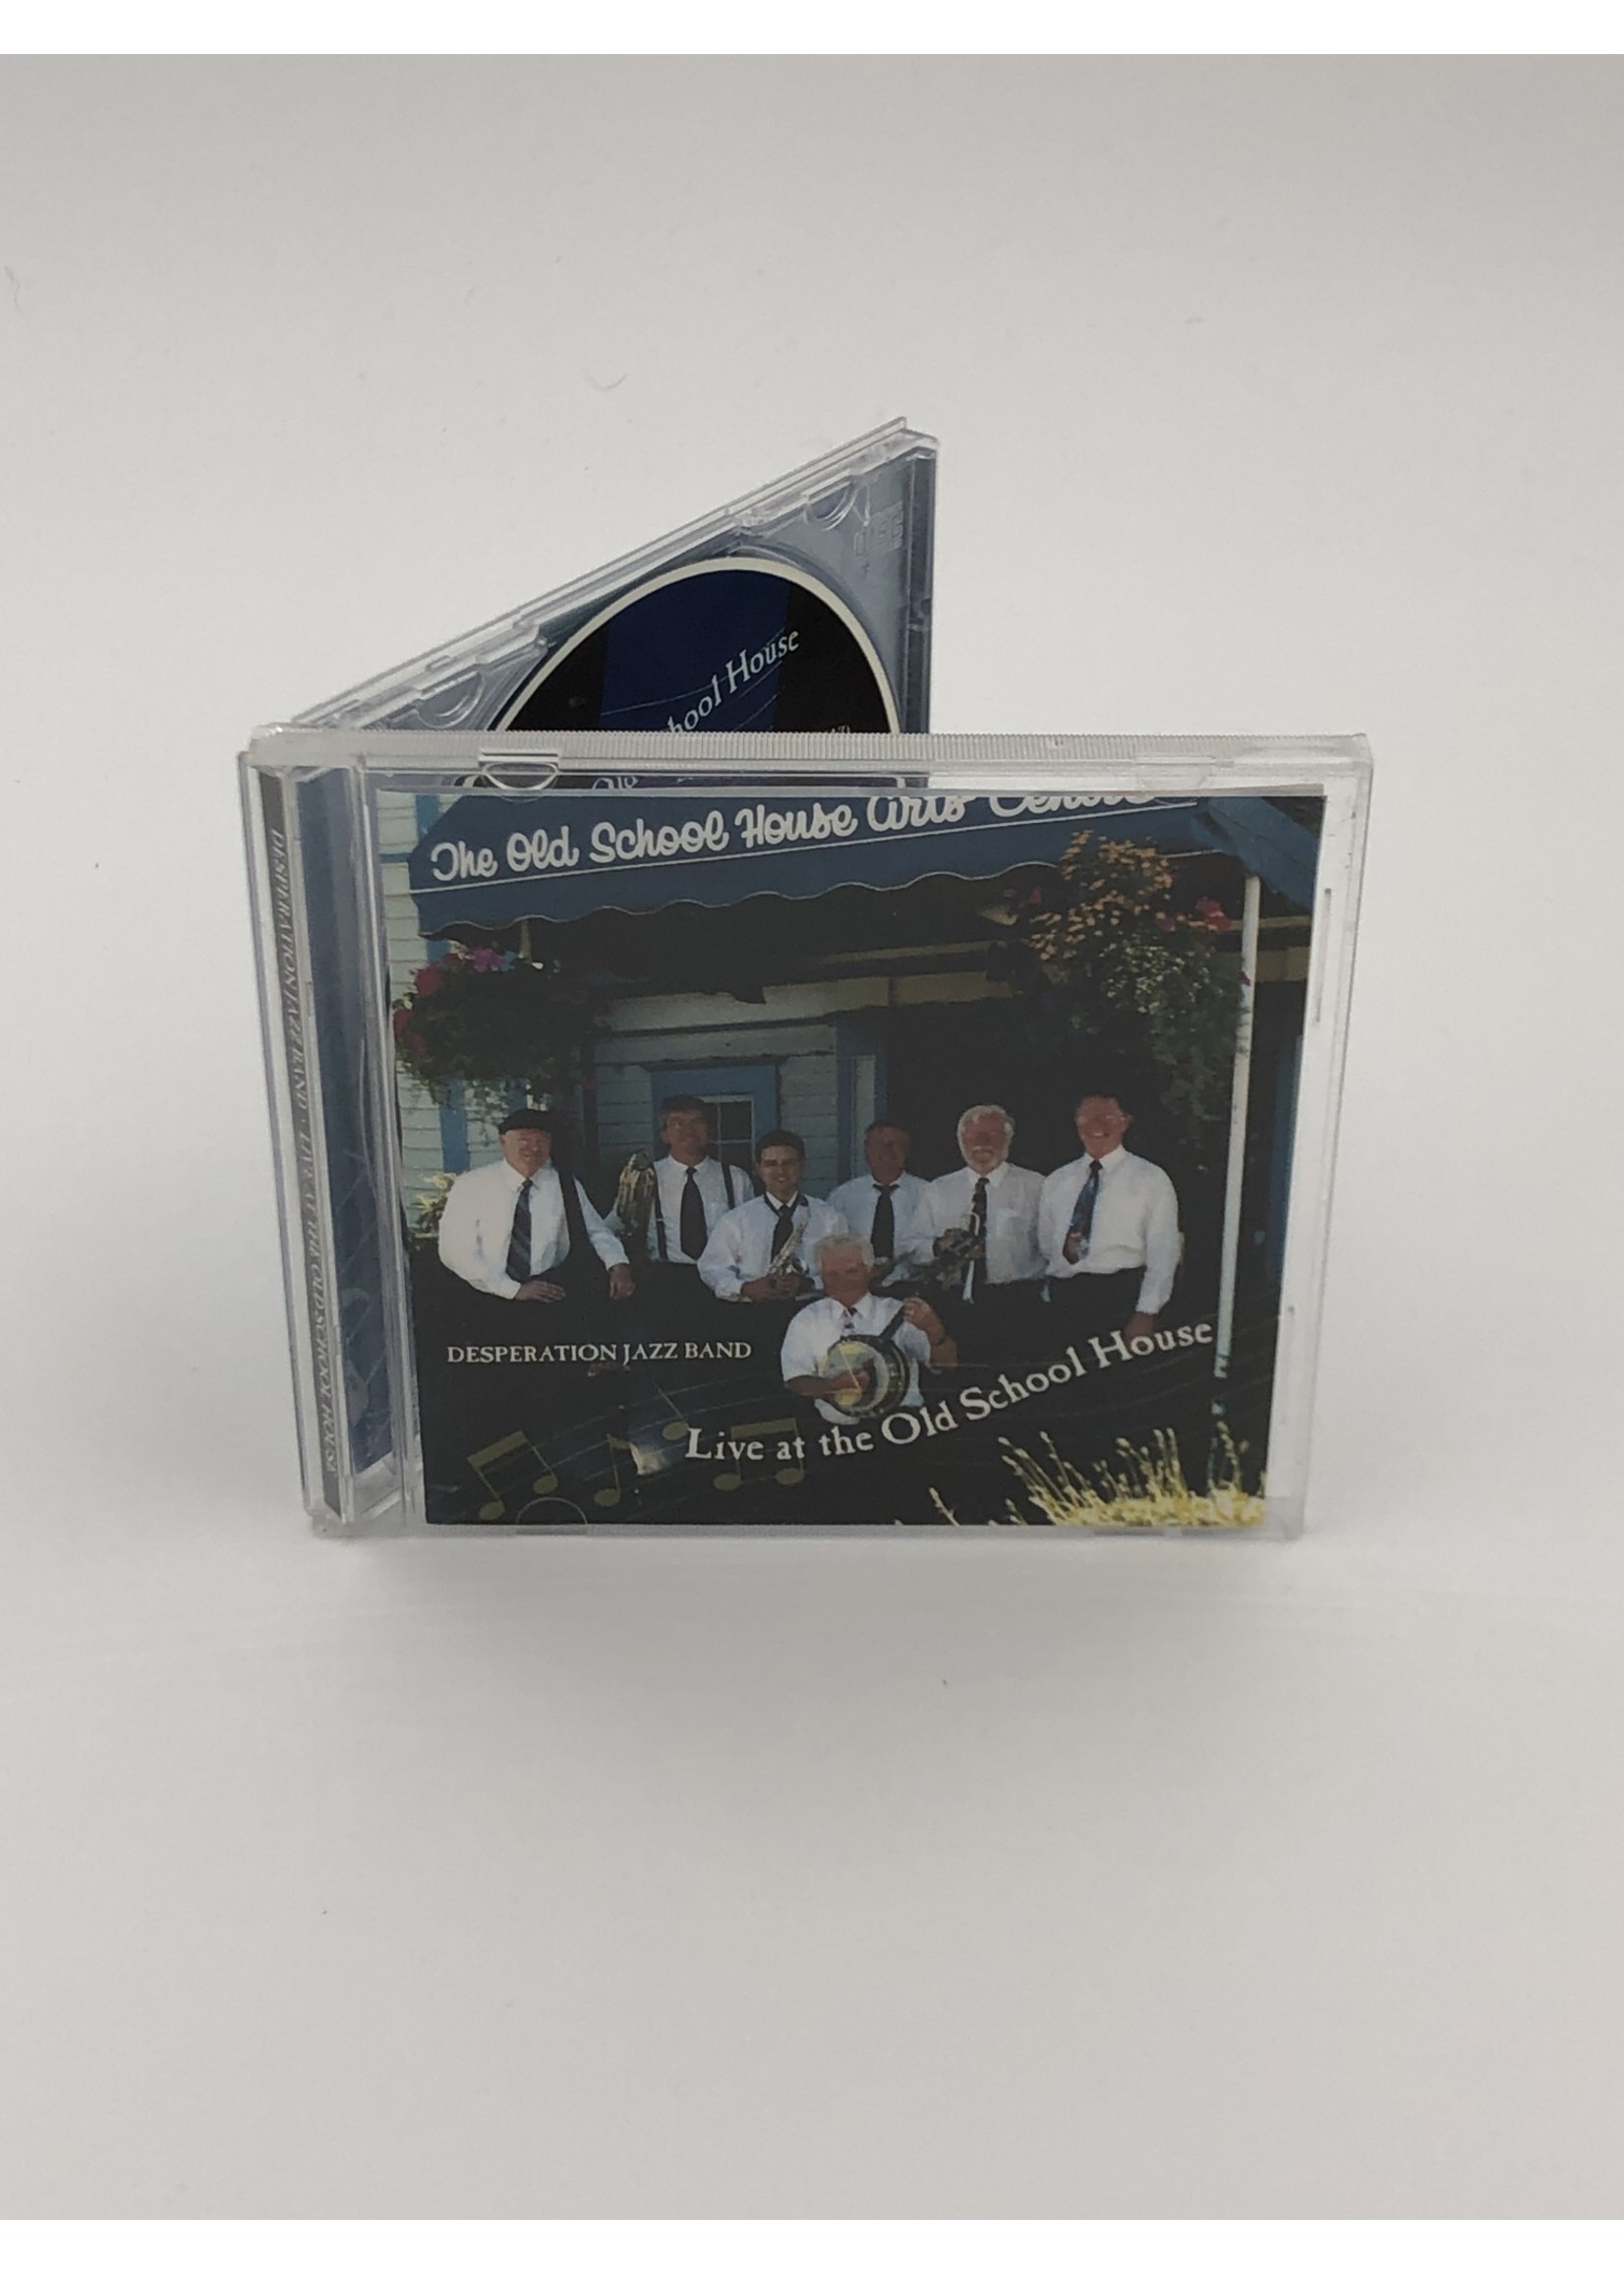 CD Desperation Jazz Band: Live at the Old School House CD